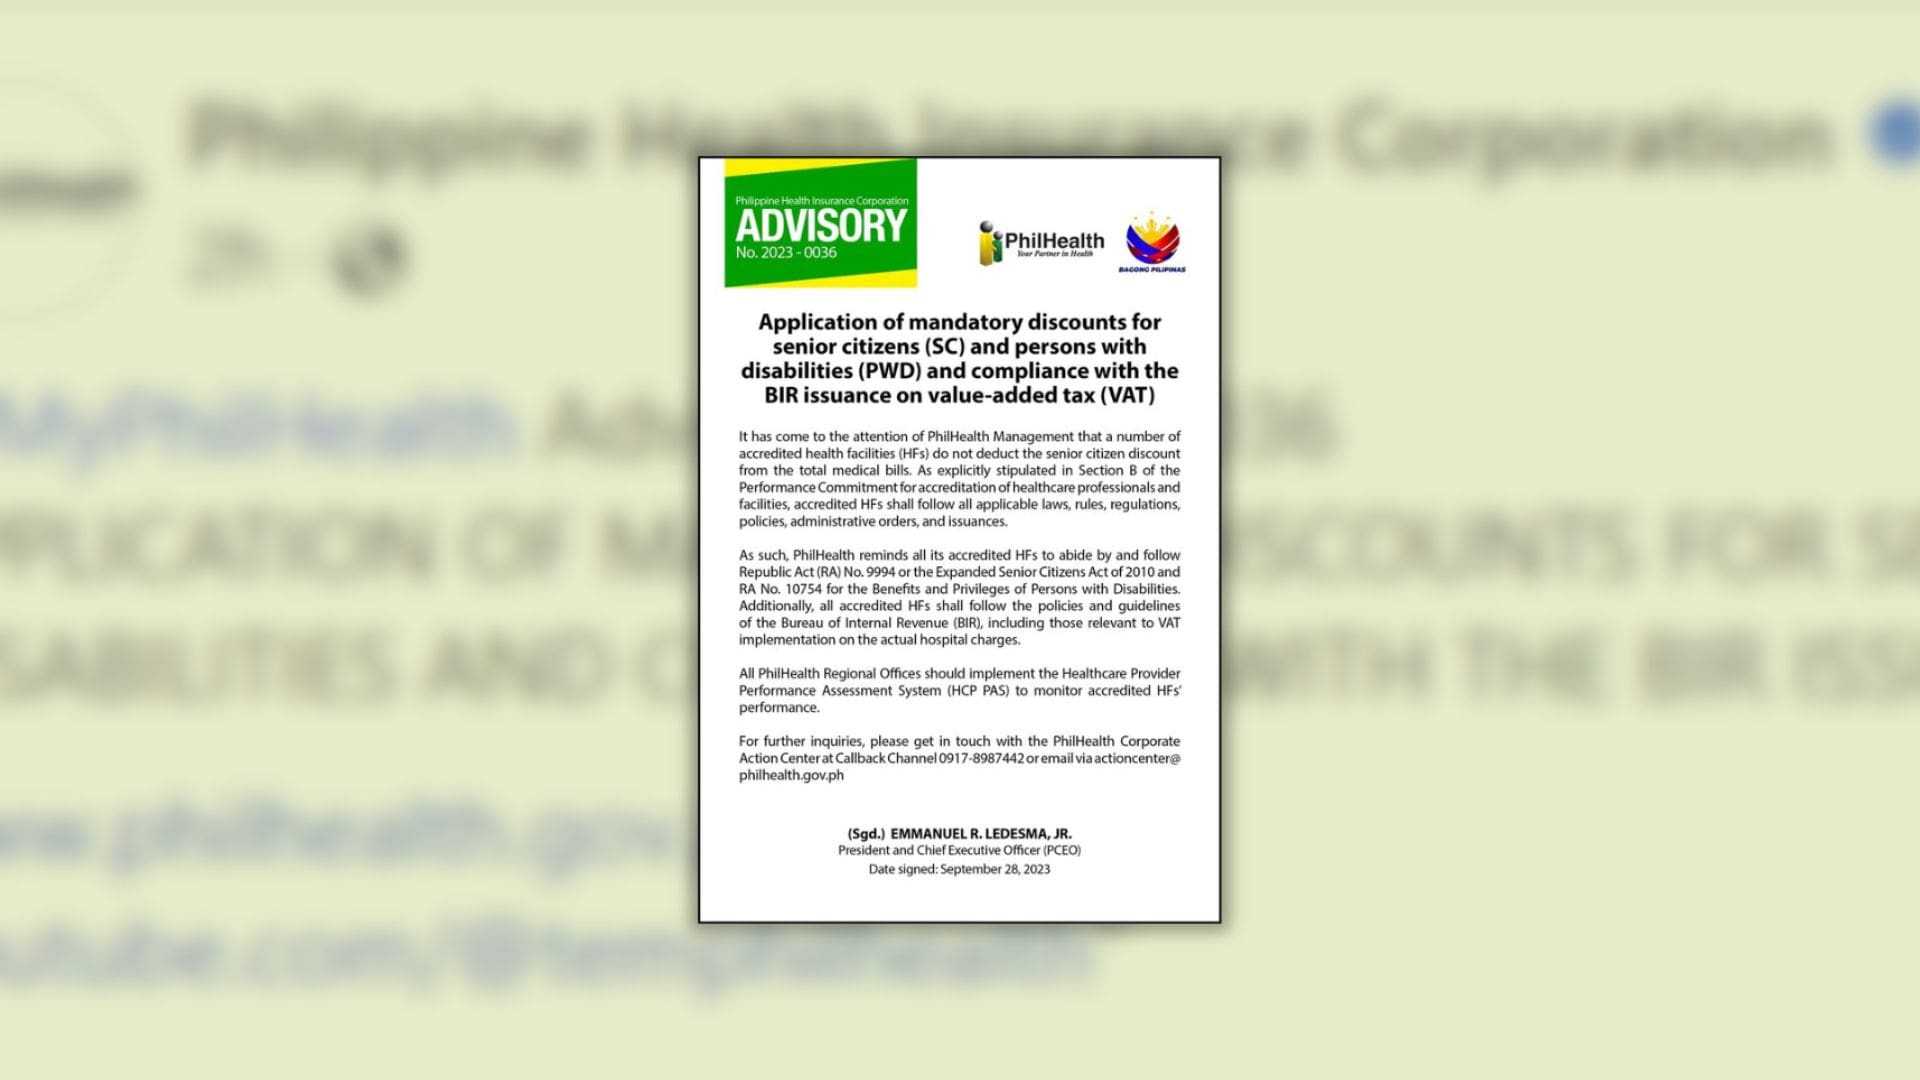 PhilHealth urges accredited hospitals to follow mandatory discounts for senior citizens